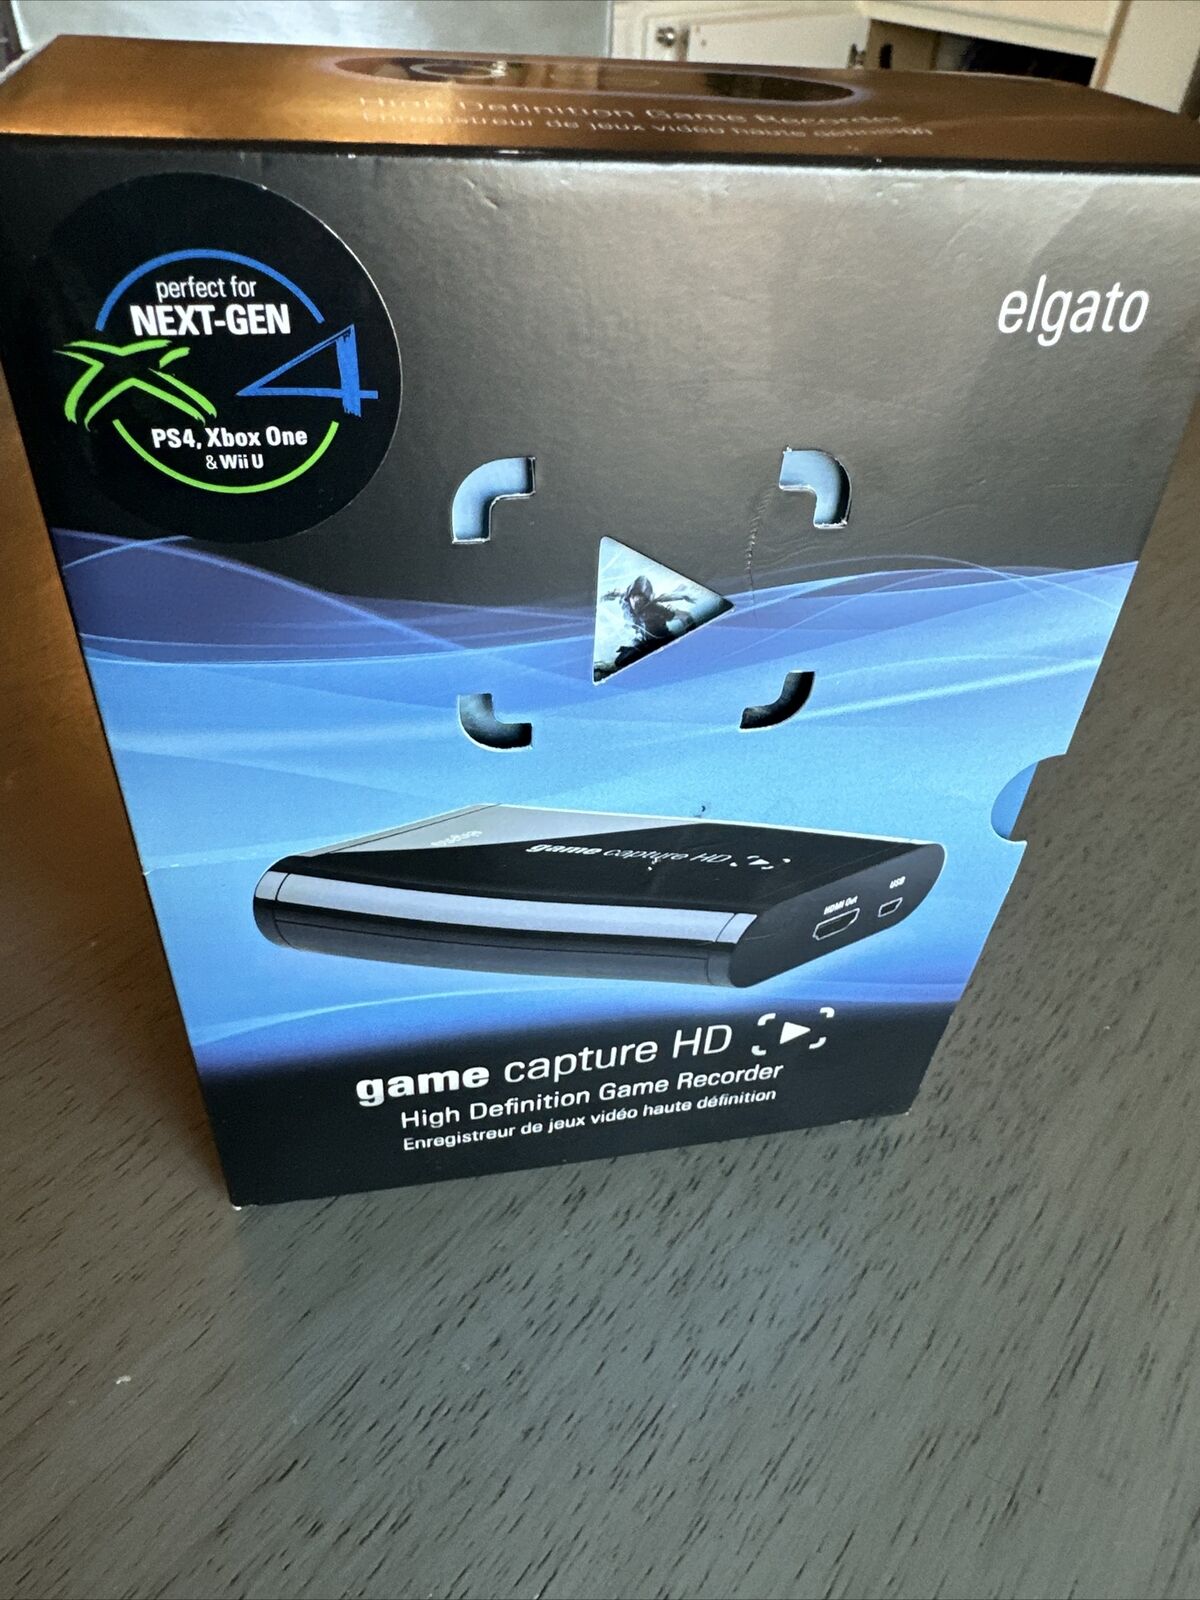 Elgato Game Capture HD High Definition Game Recorder NEW, Open Box